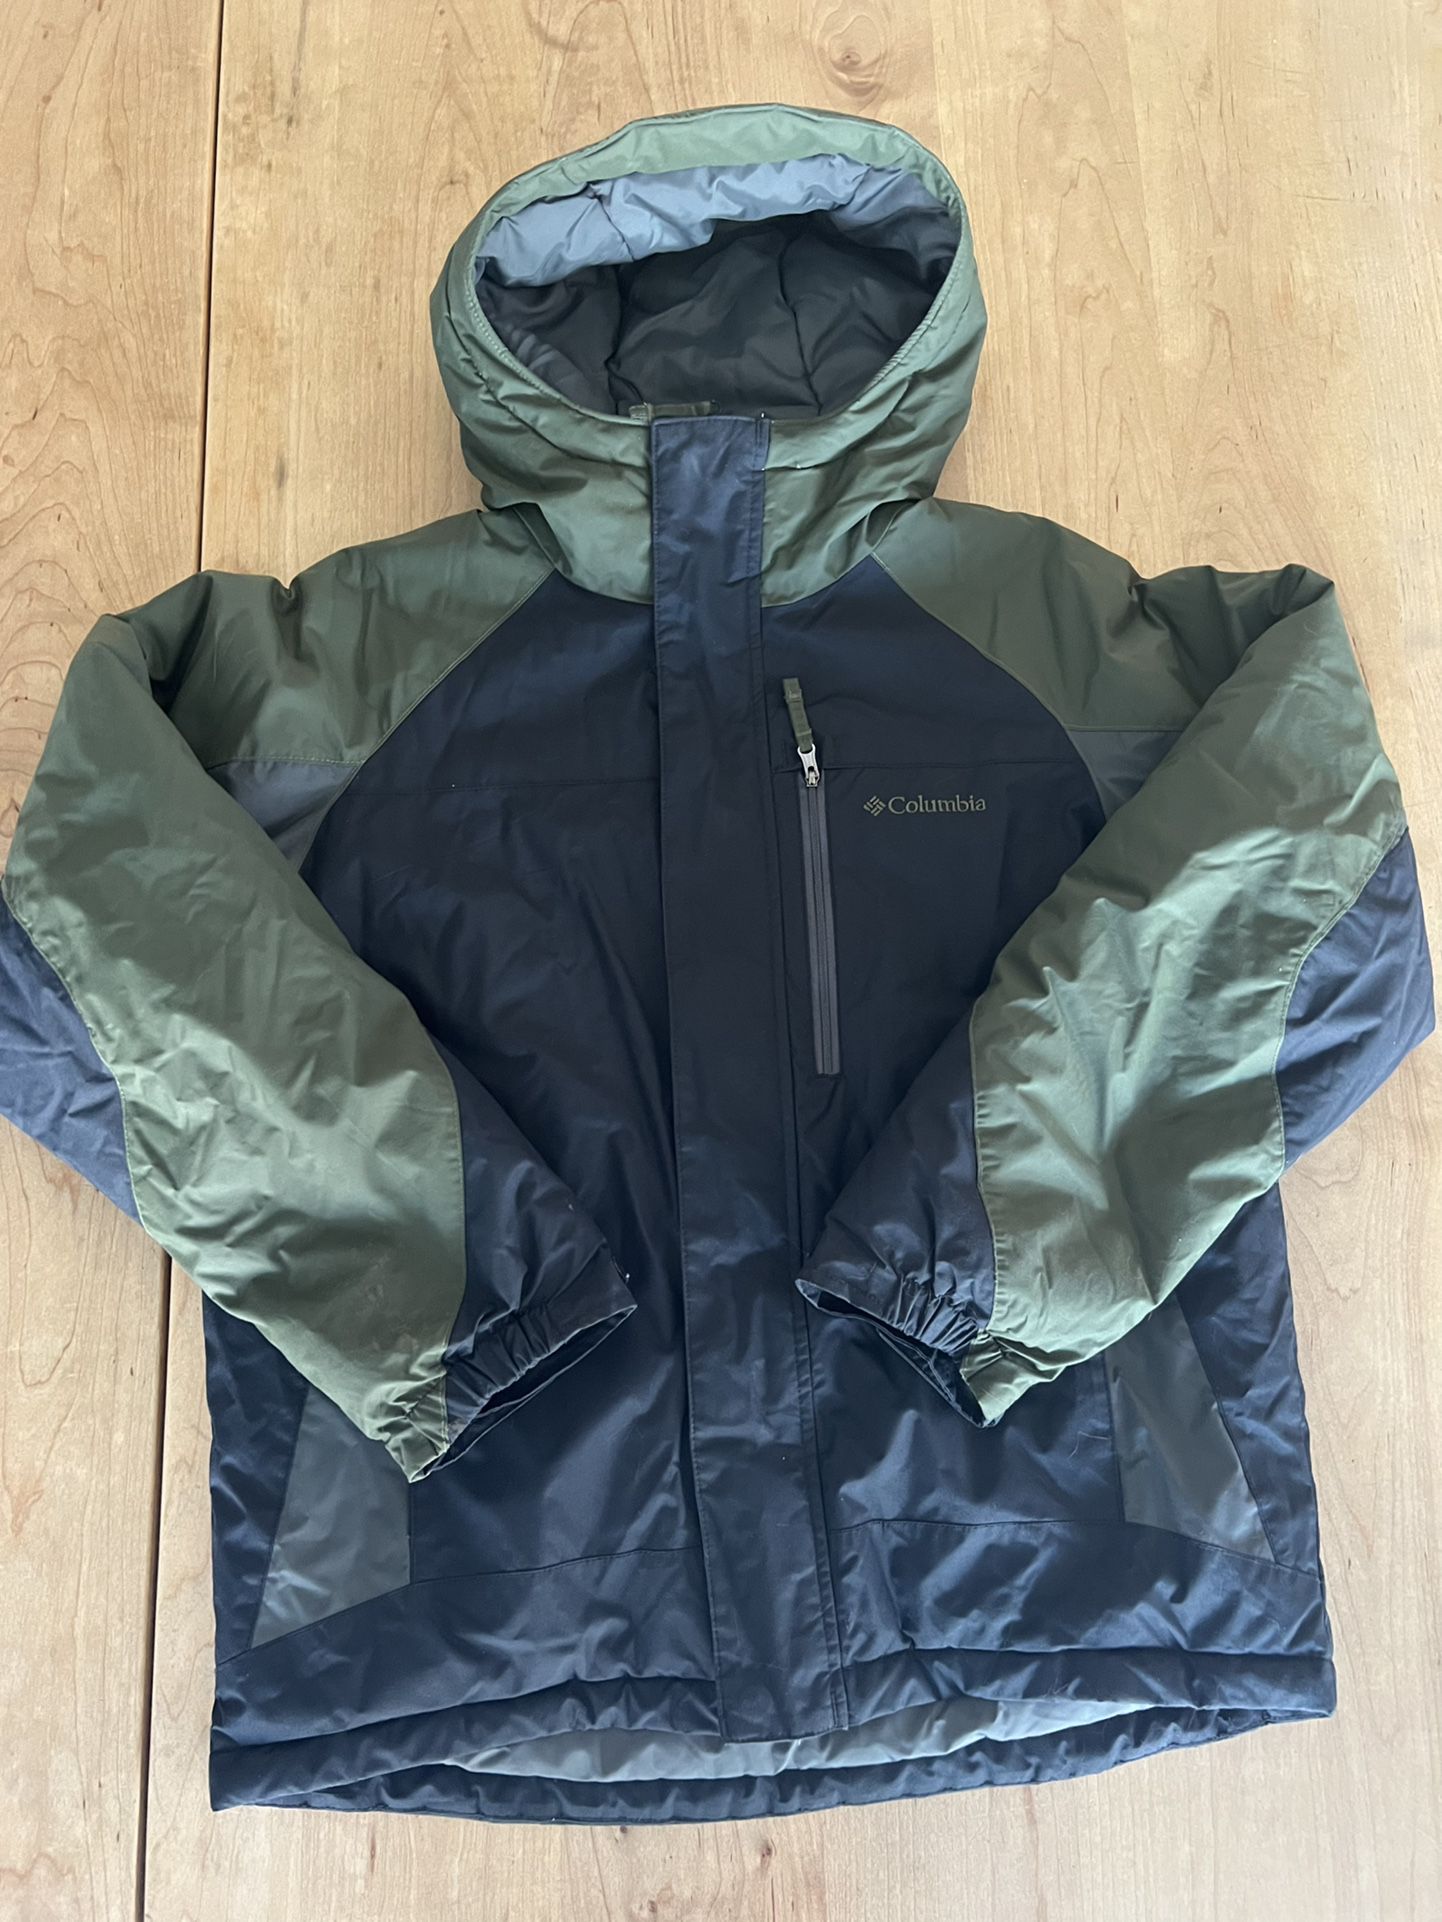 Columbia Coat Youth 14-16 Like New Condition!